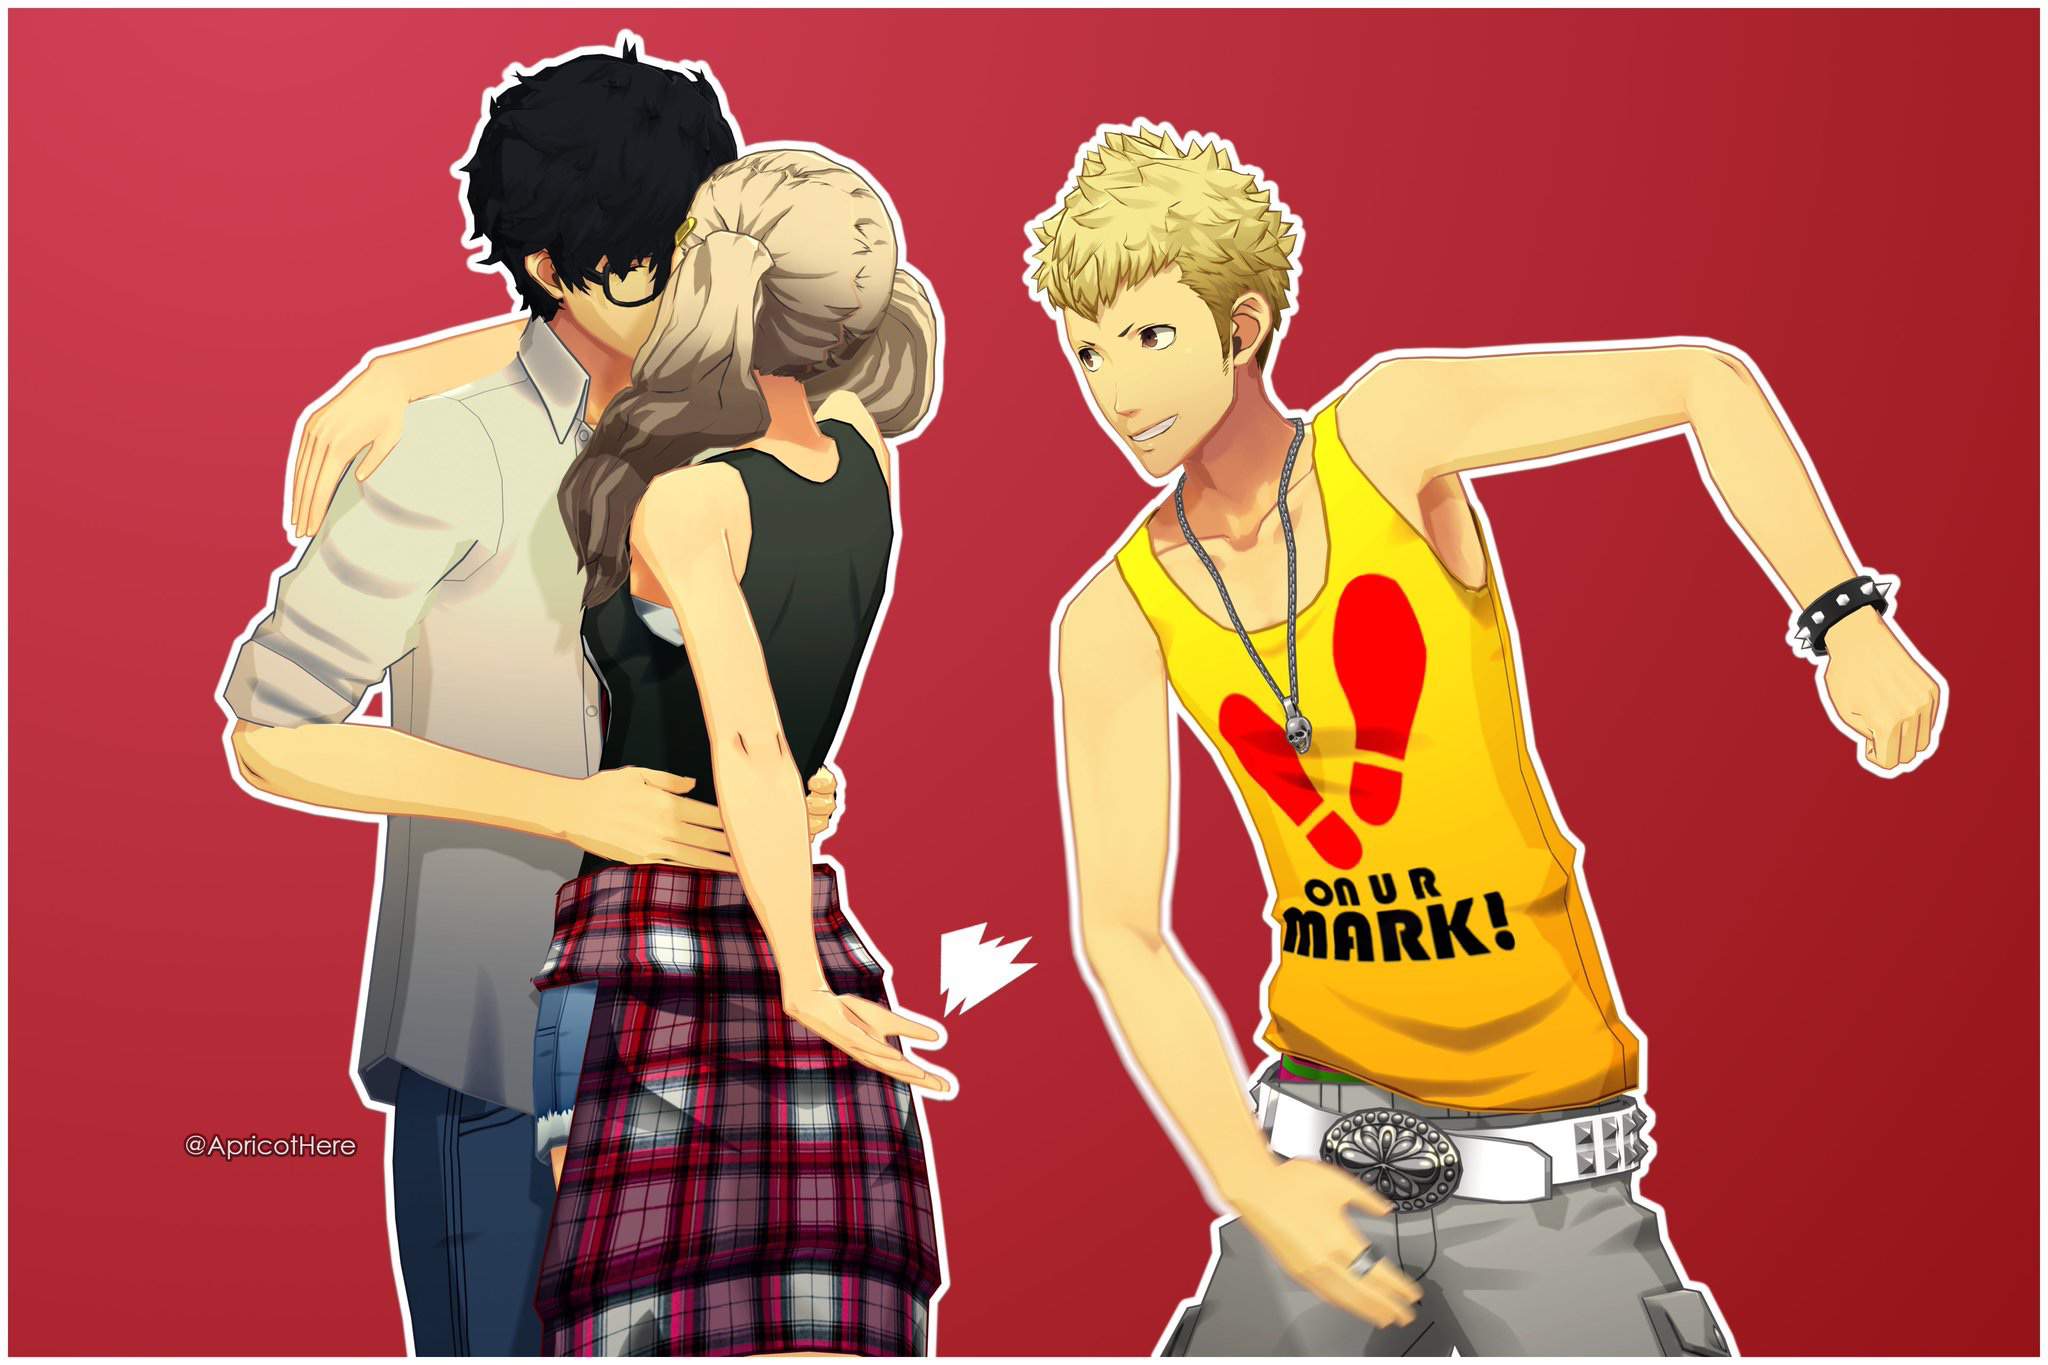 Lol if Akira and Ann wear a couple I can see ryuji be happy for them 😆💕.